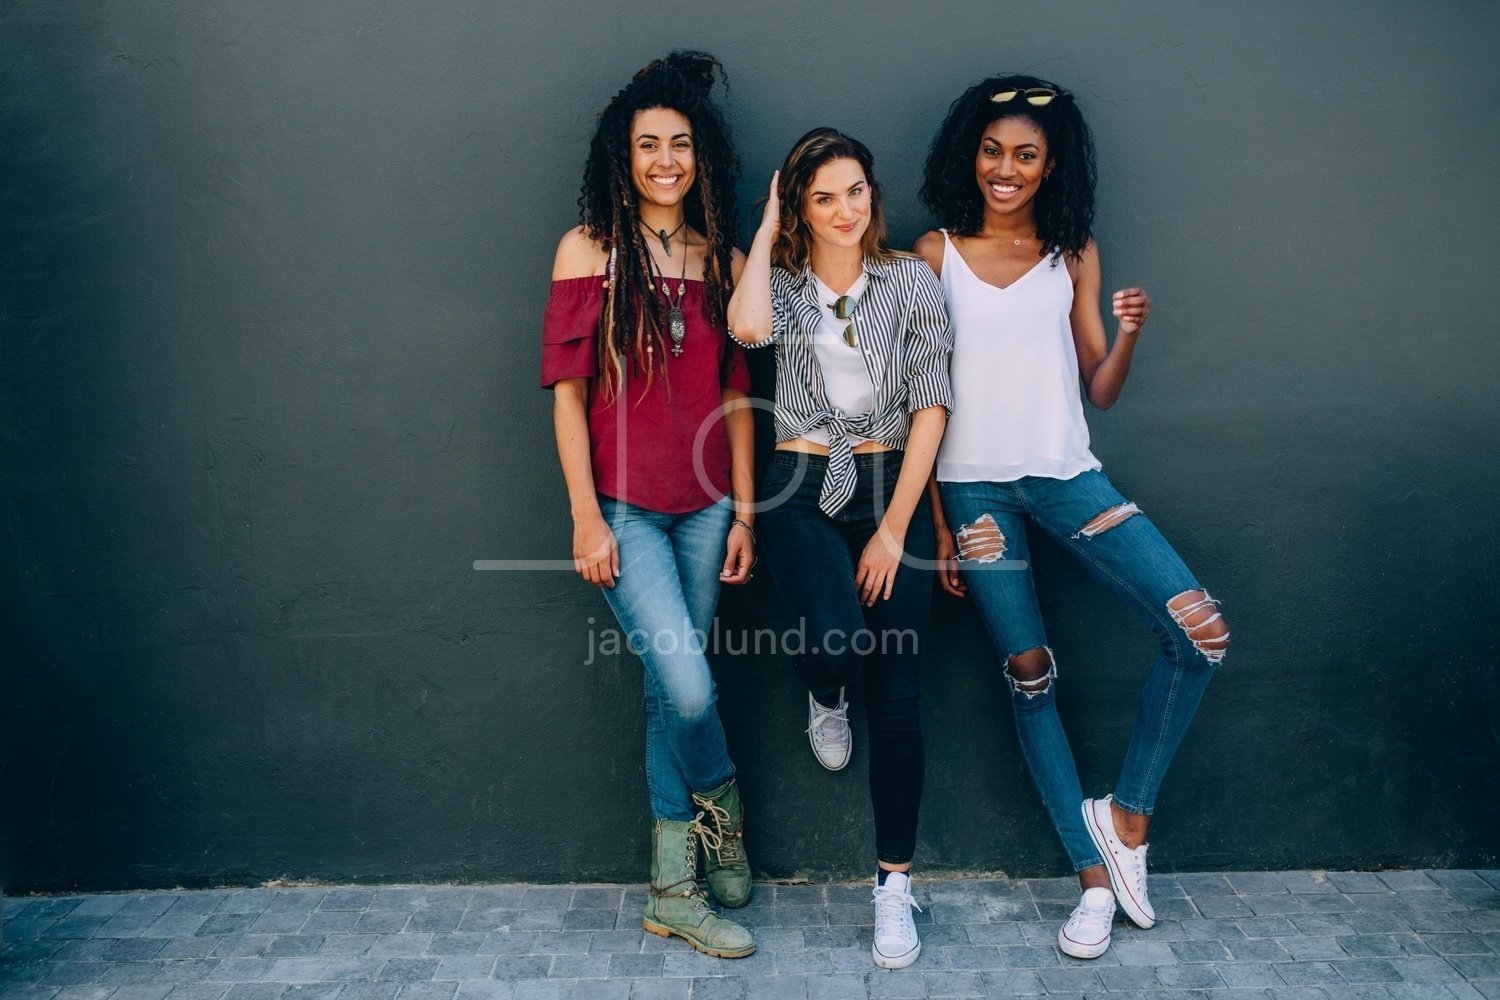 Premium Photo | Three best friends posing in studio, wearing summer style  outfit and jeans shorts